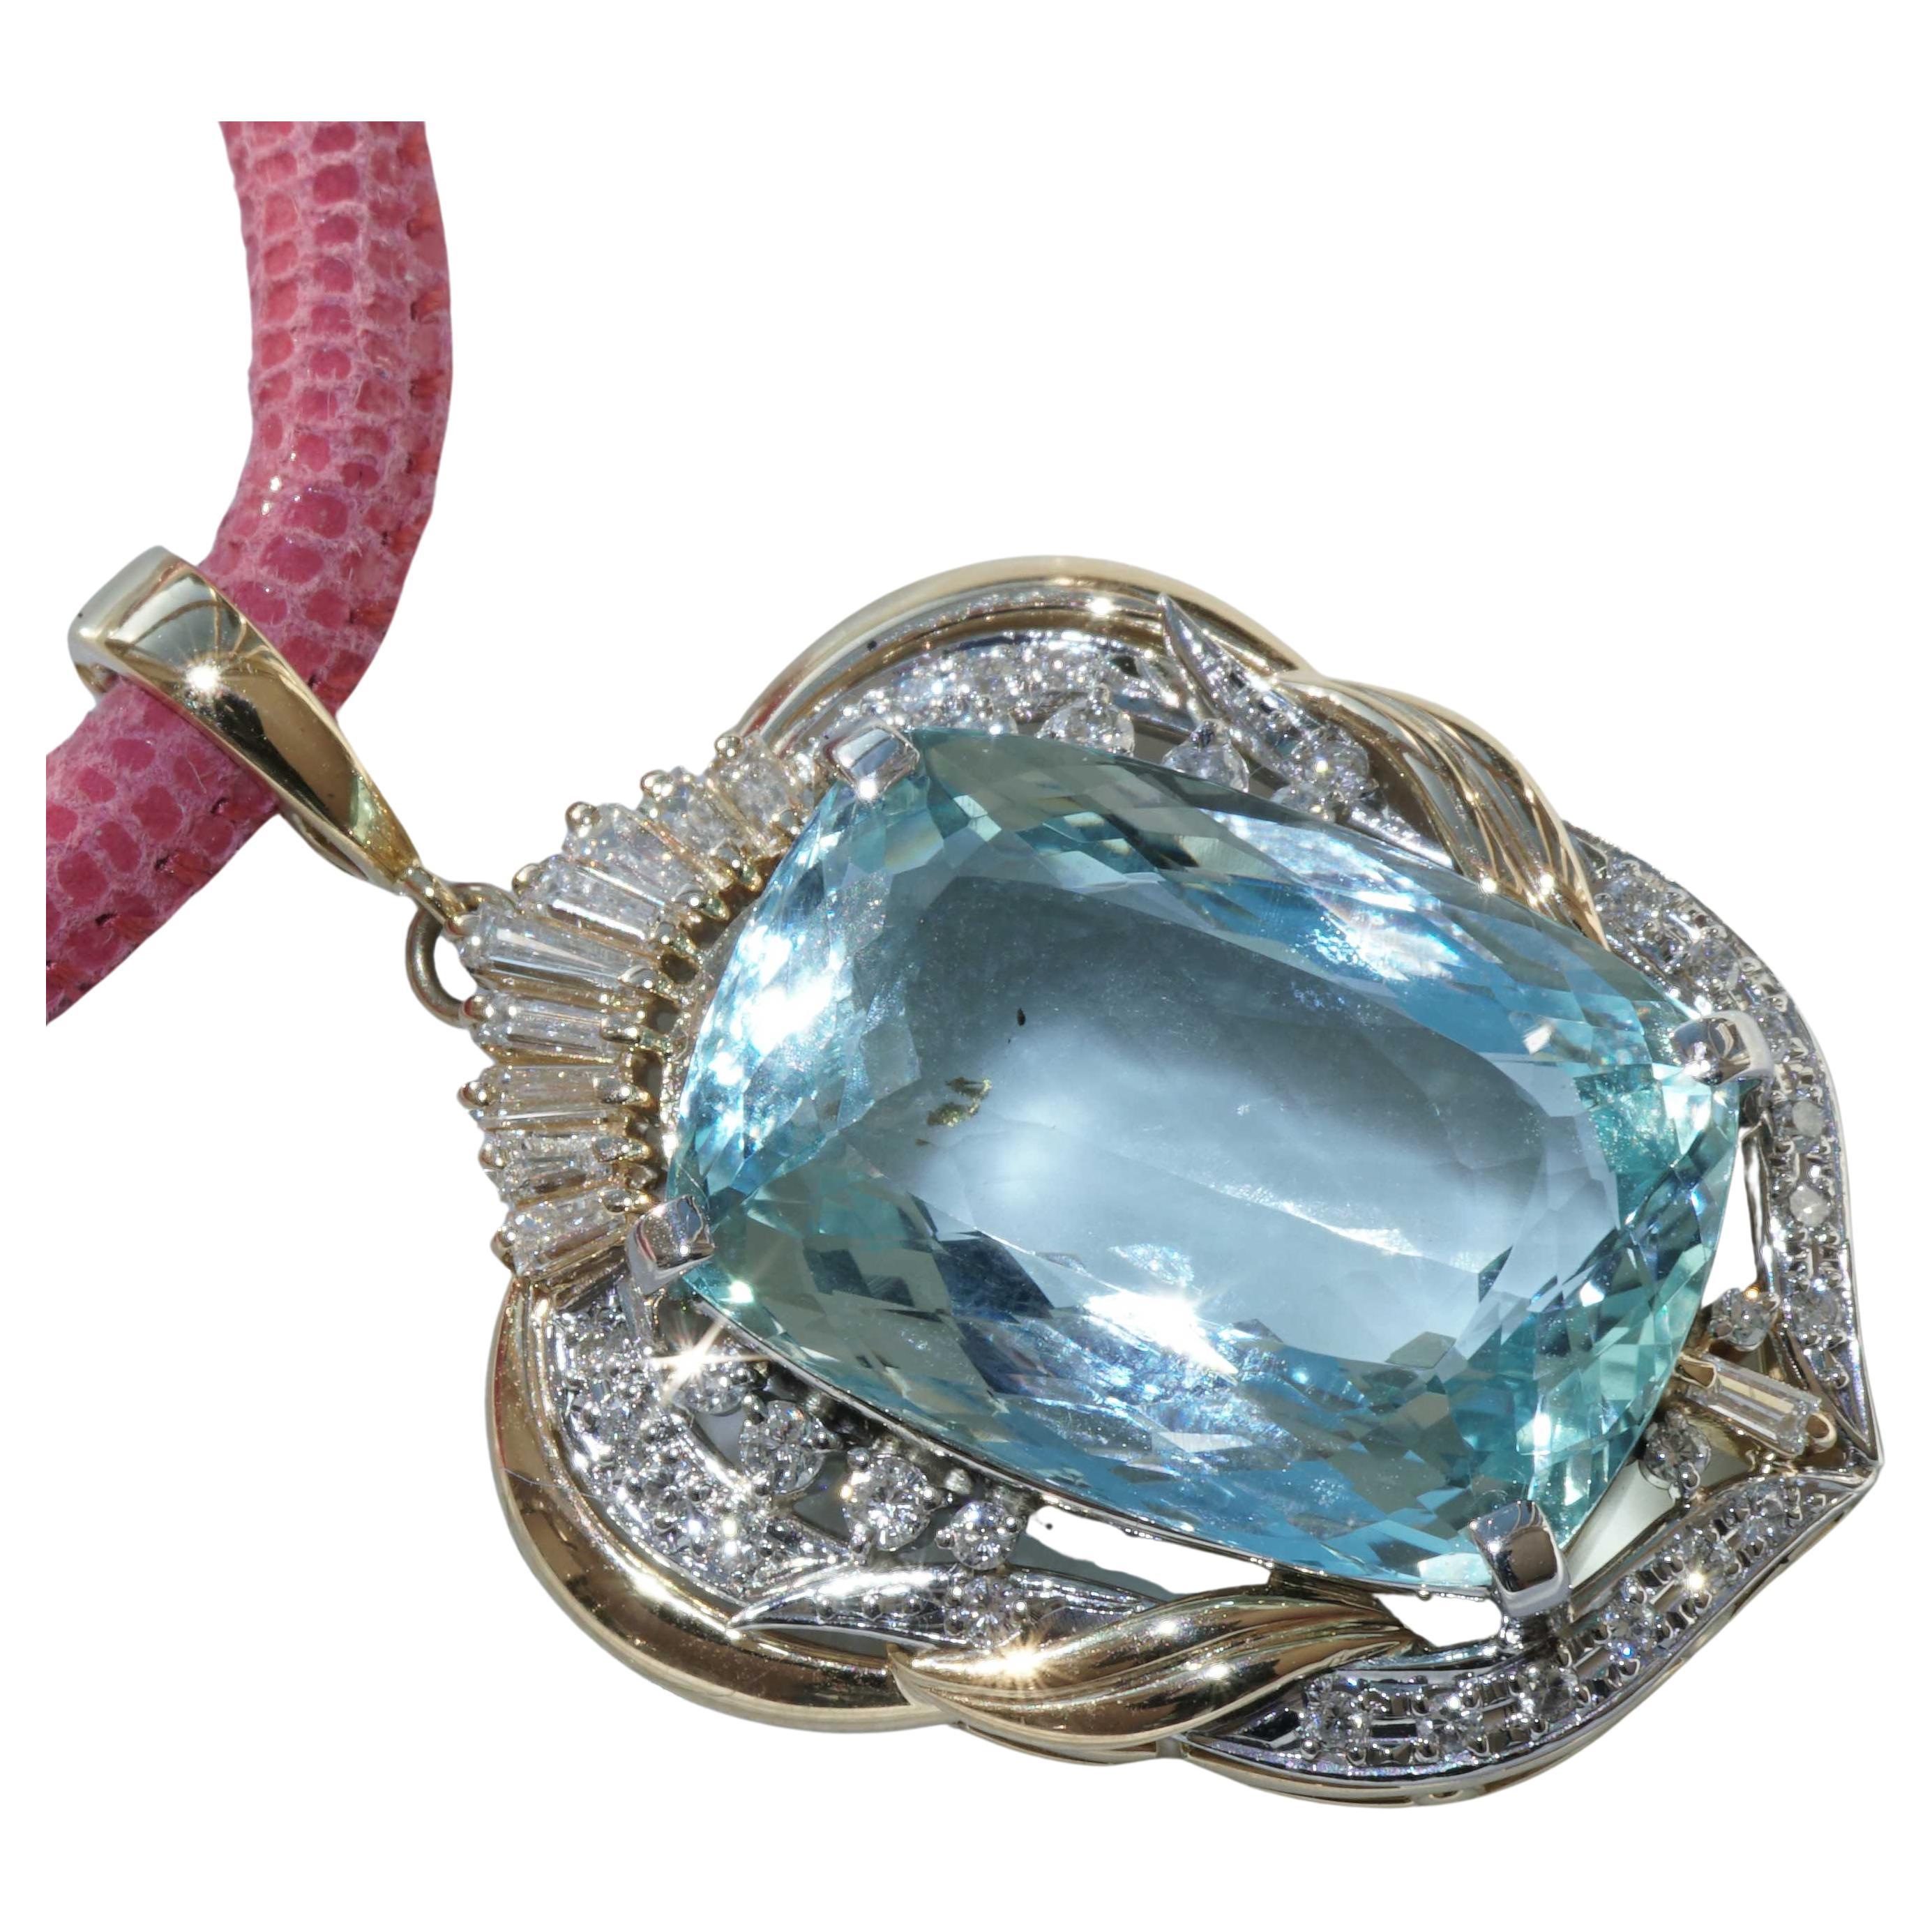 Aquamarine Brilliant Clip Pendant 24.5 0.83 ct this Color is rare and demanded For Sale